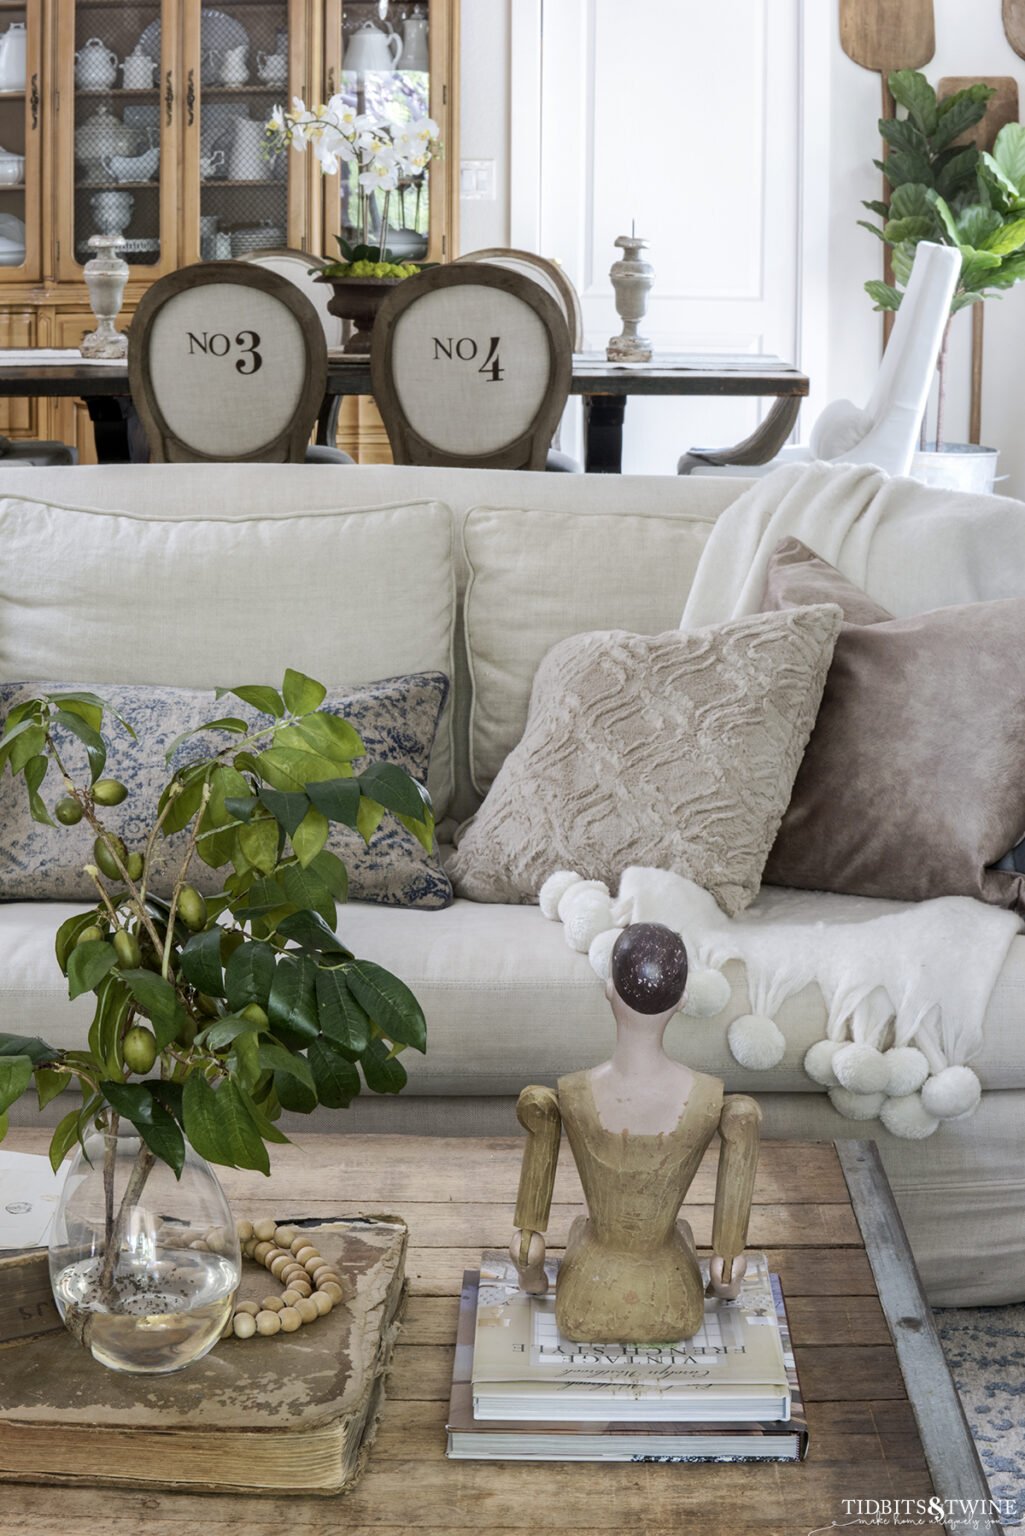 How to Put a Throw on a Couch - 8 Stylish Options - Tidbits&Twine